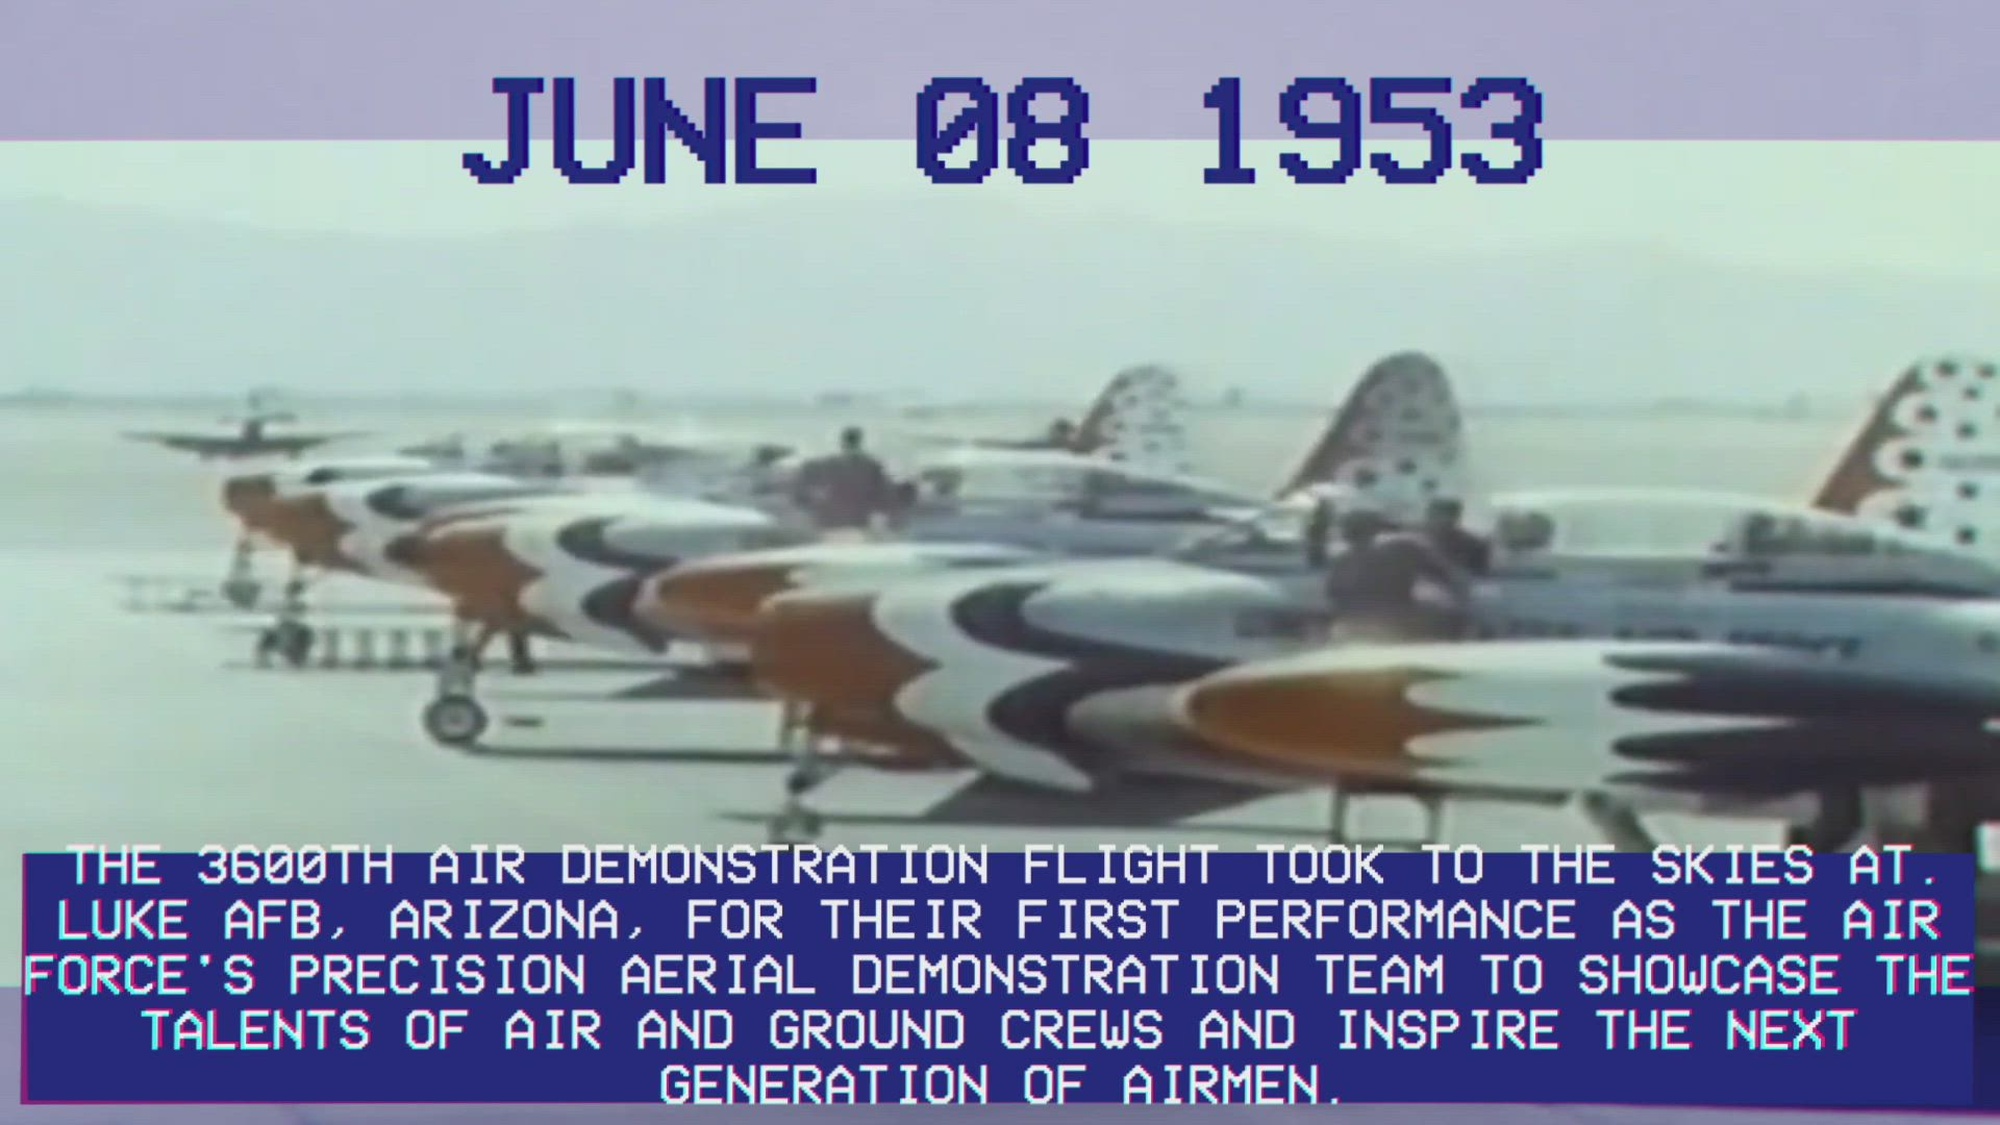 A weekly look at significant events in Air Force aviation and airpower history, celebrating the service's 75th anniversary.